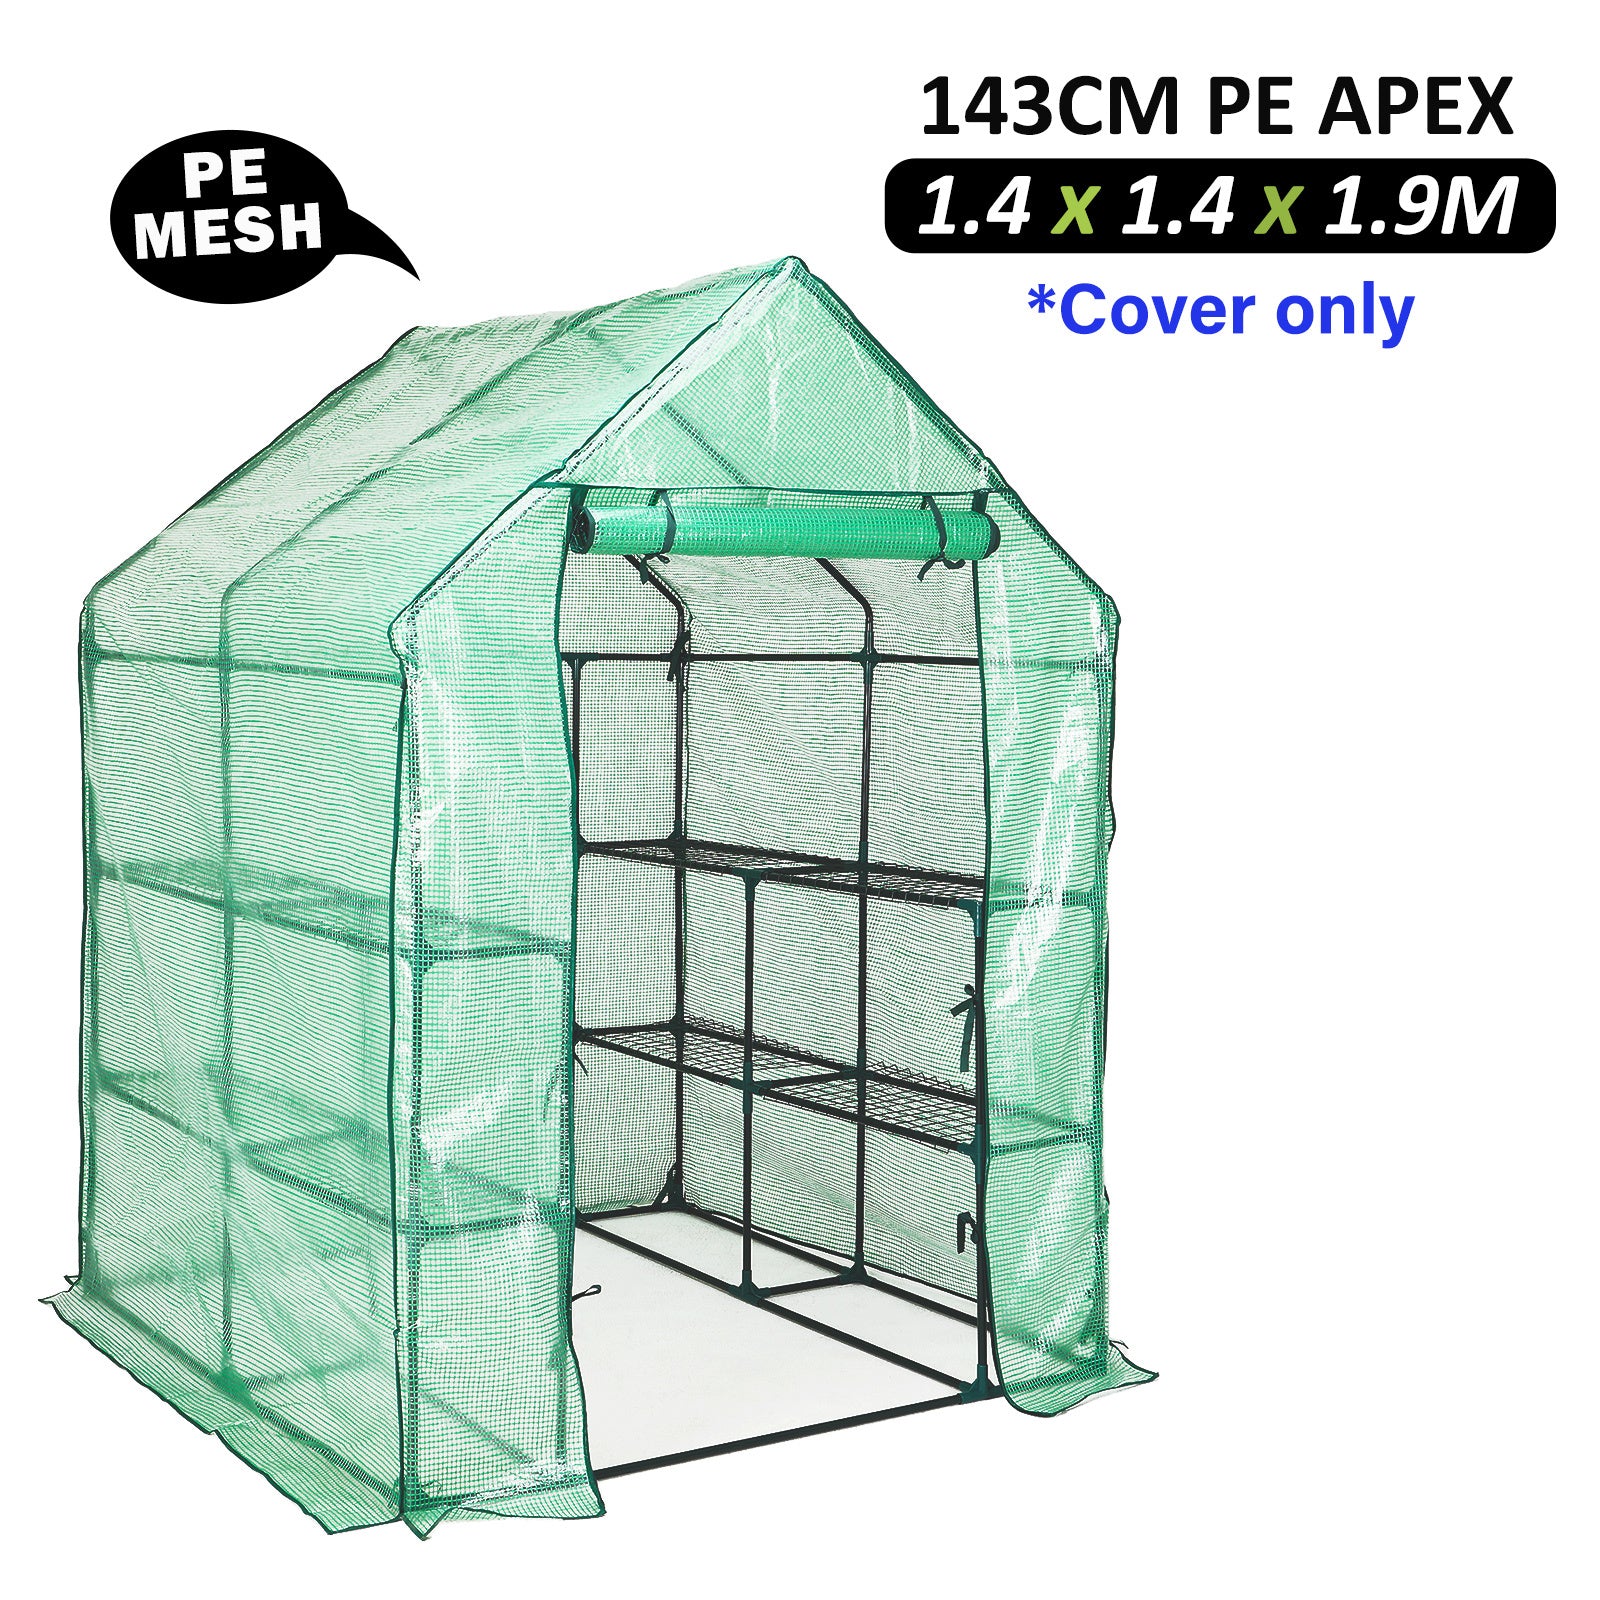 Home Ready Apex 143cm Garden Greenhouse Shed PE Cover Only - image5